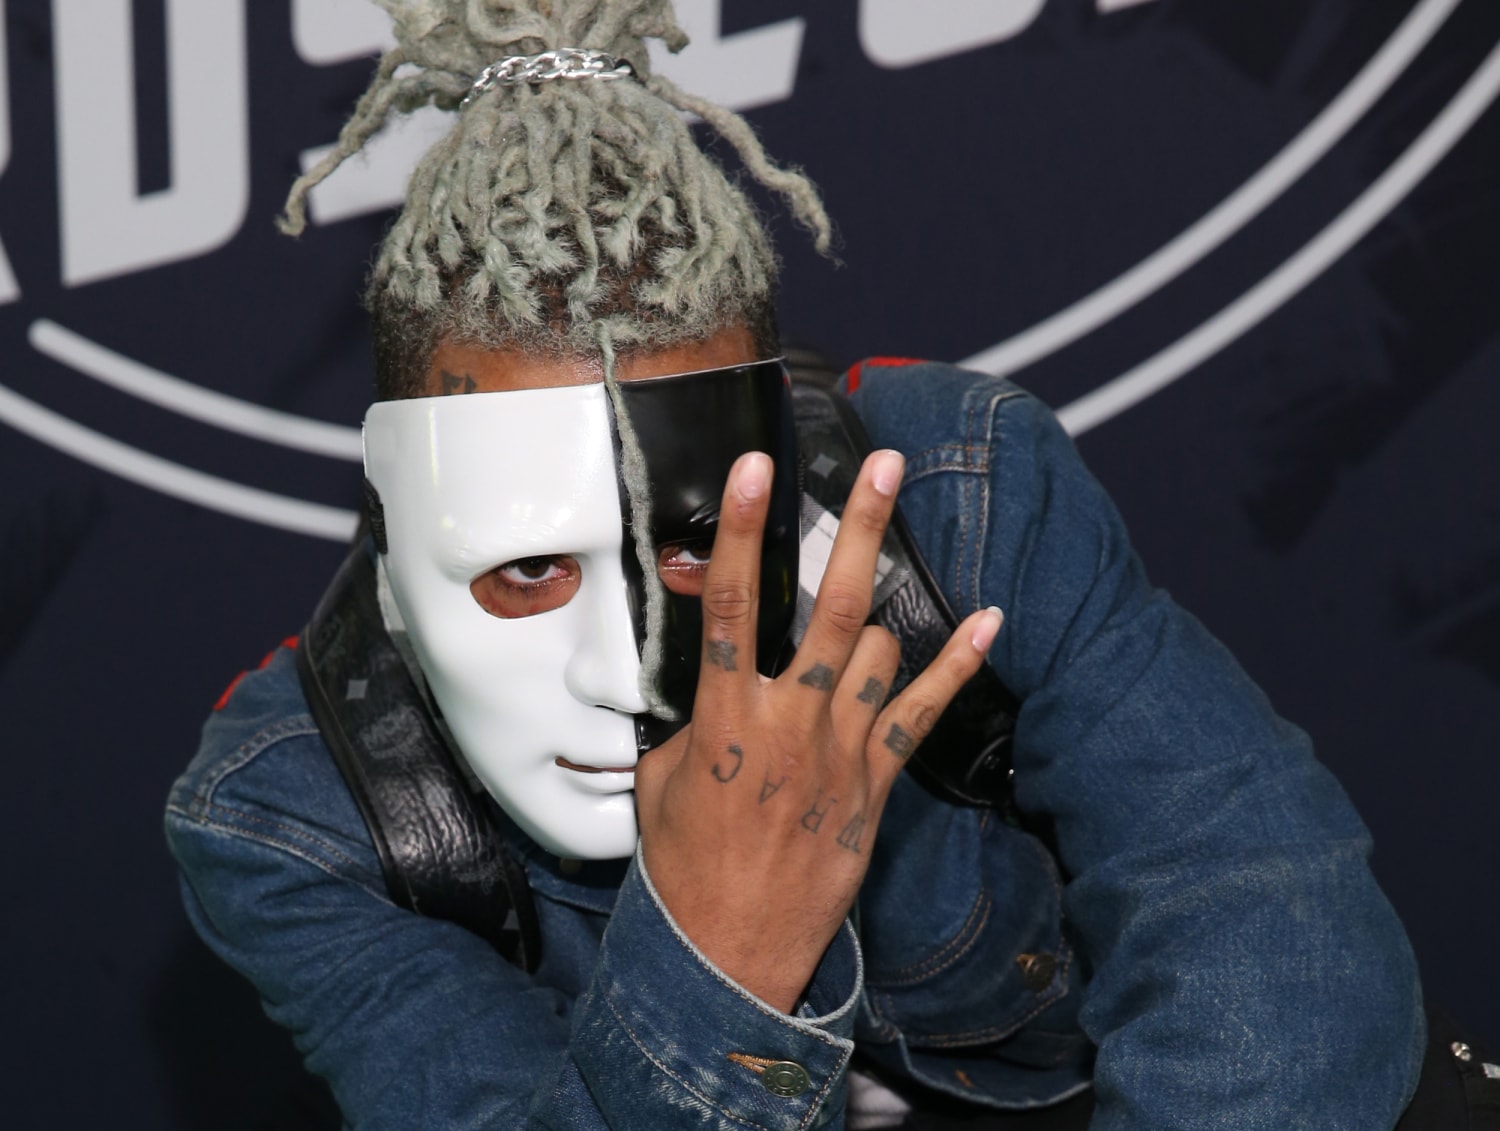 Rapper XXXTentacion is killed in apparent robbery in Florida